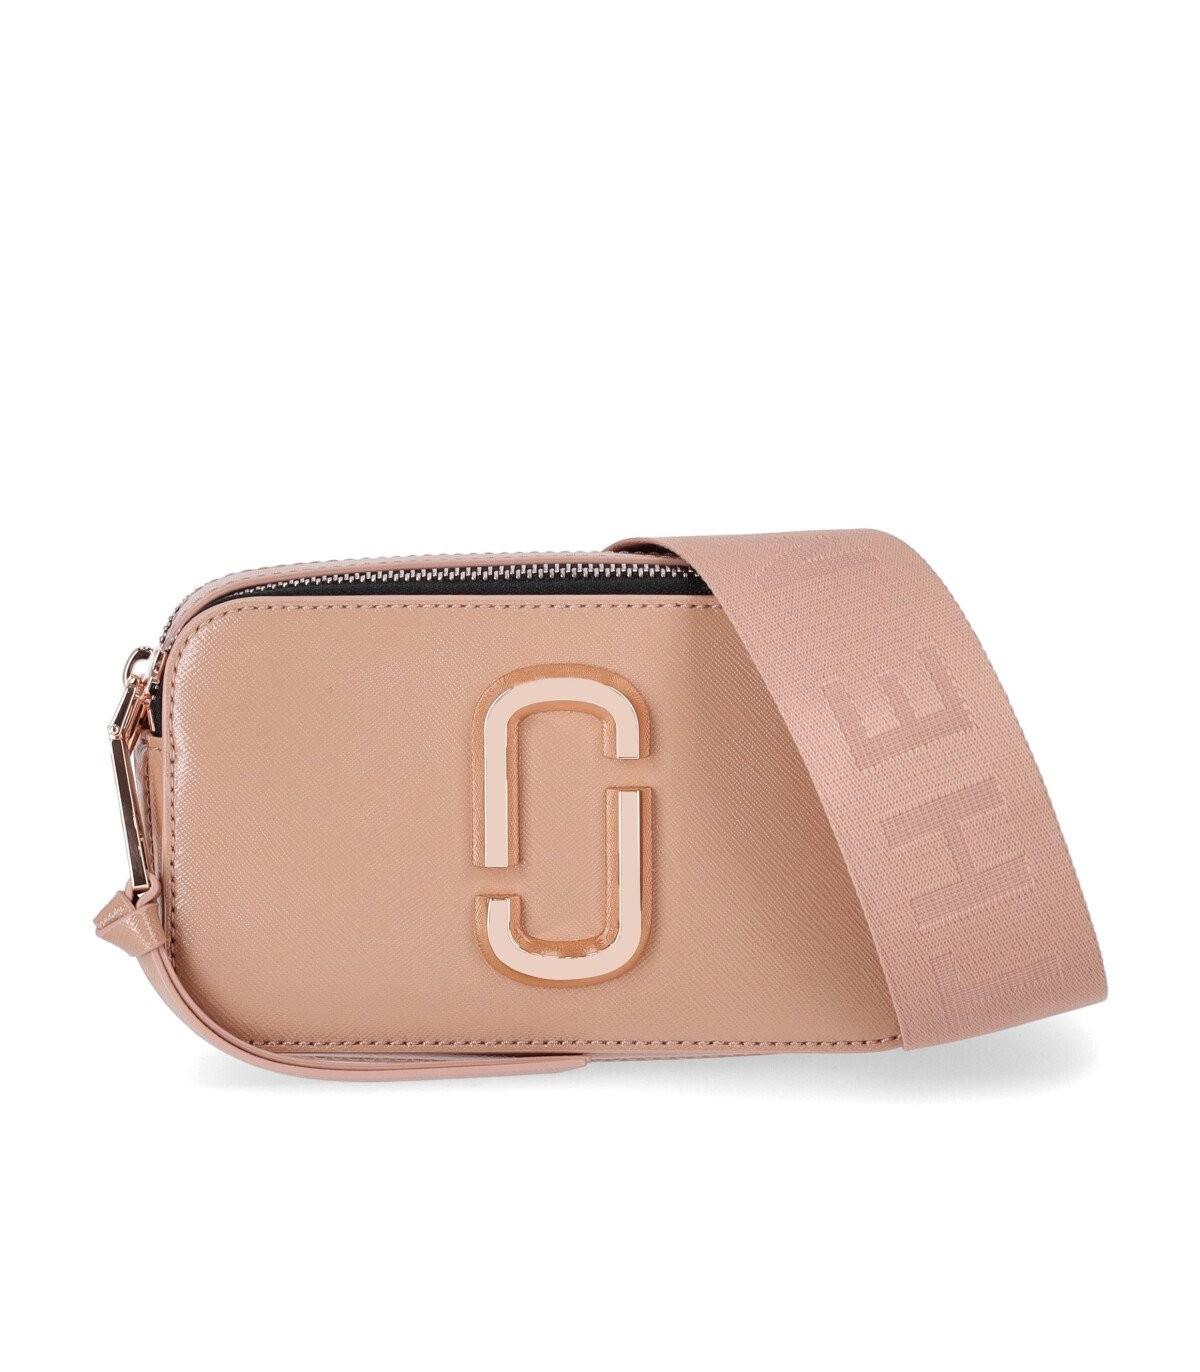 Marc Jacobs The Snapshot Dtm Cross-body Bag in Natural